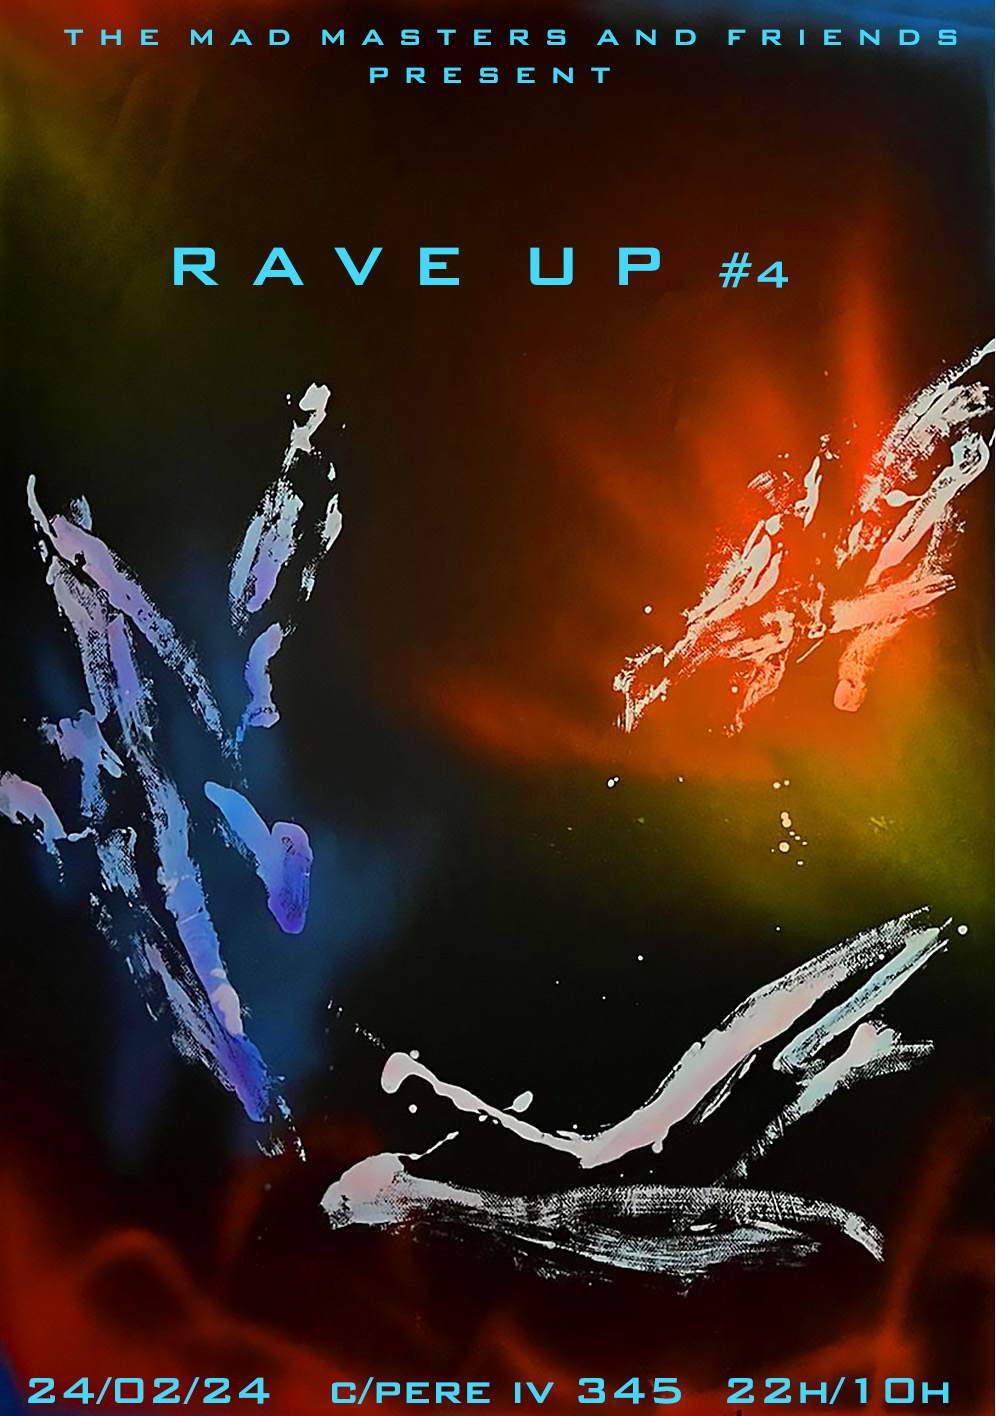 RAVE UP # 4 - フライヤー表